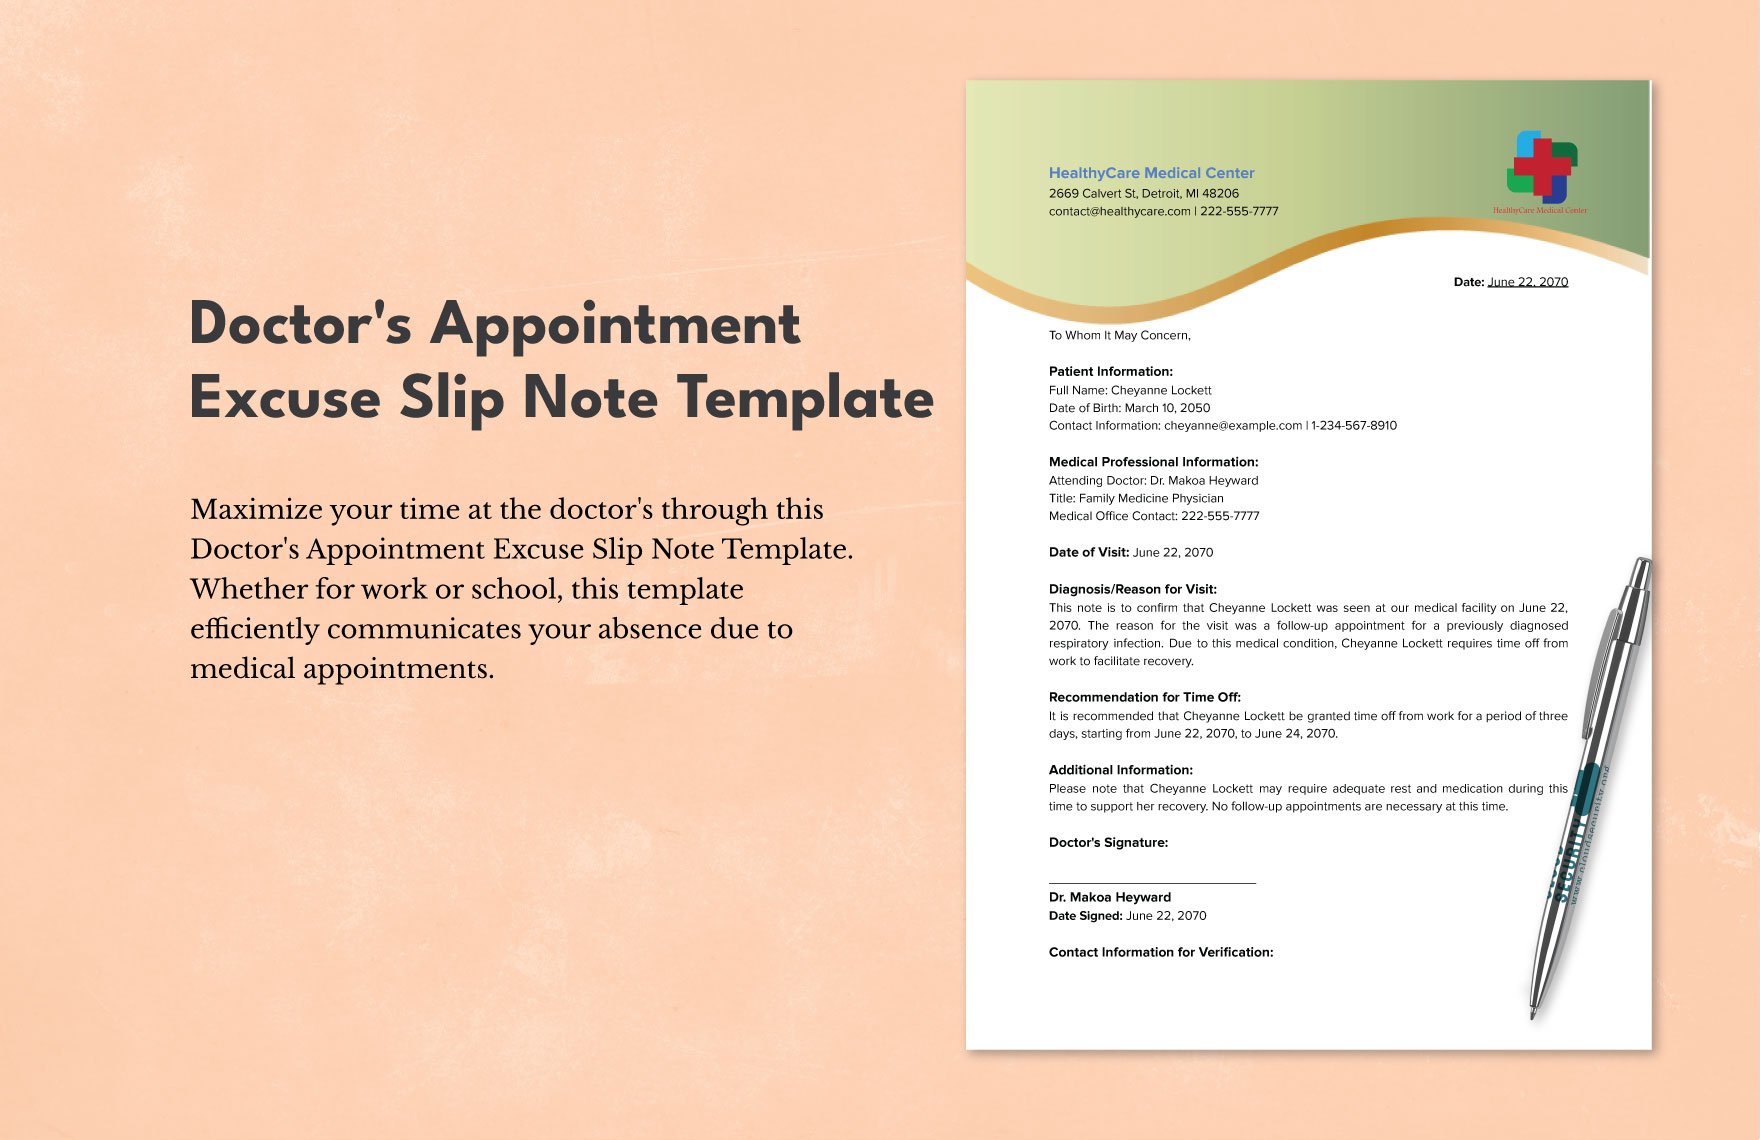 Doctor's Appointment Excuse Slip Note Template